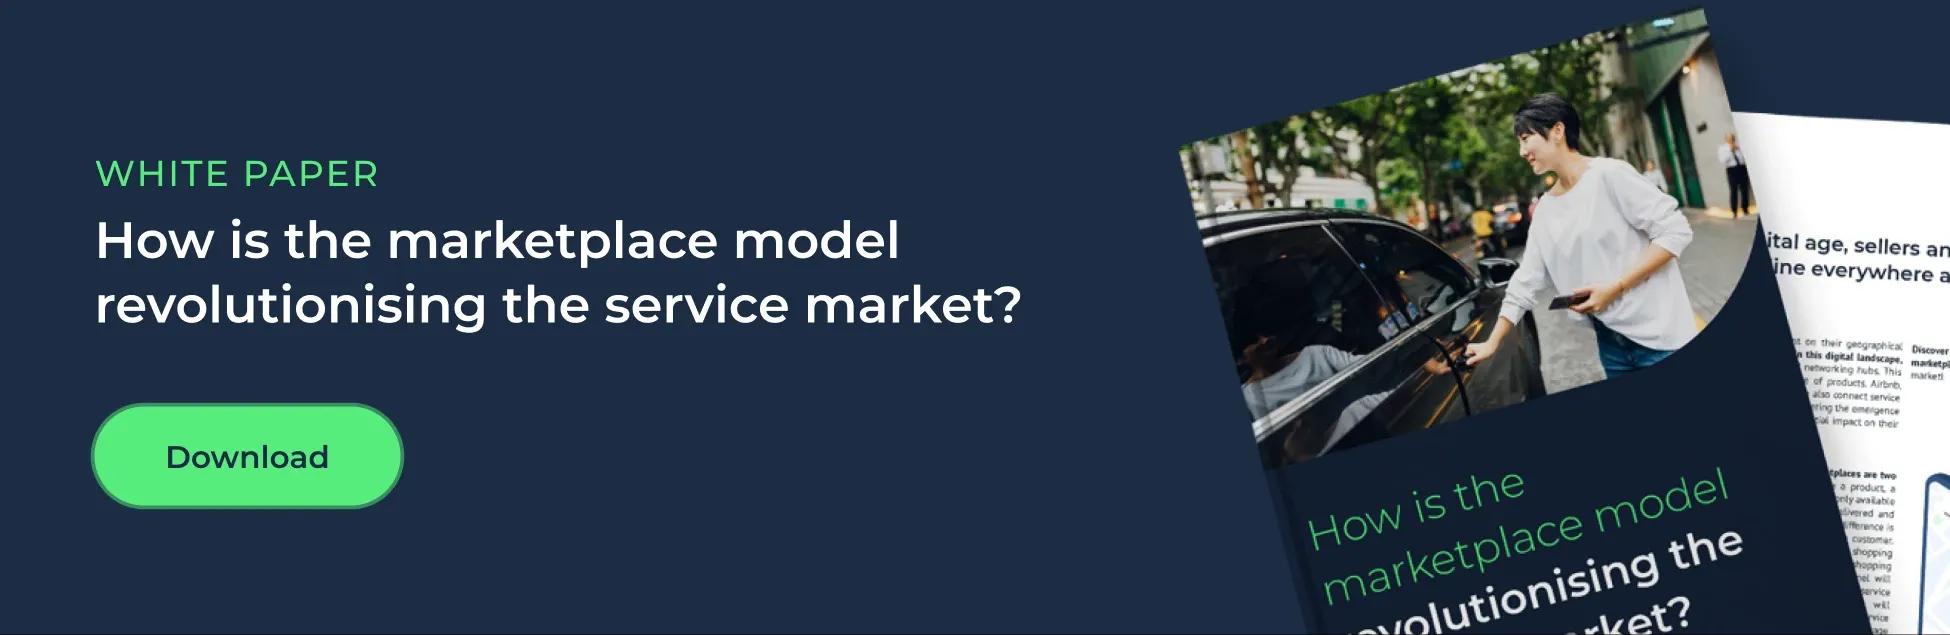 White paper: How is the marketplace model revolutionalizing the services market?